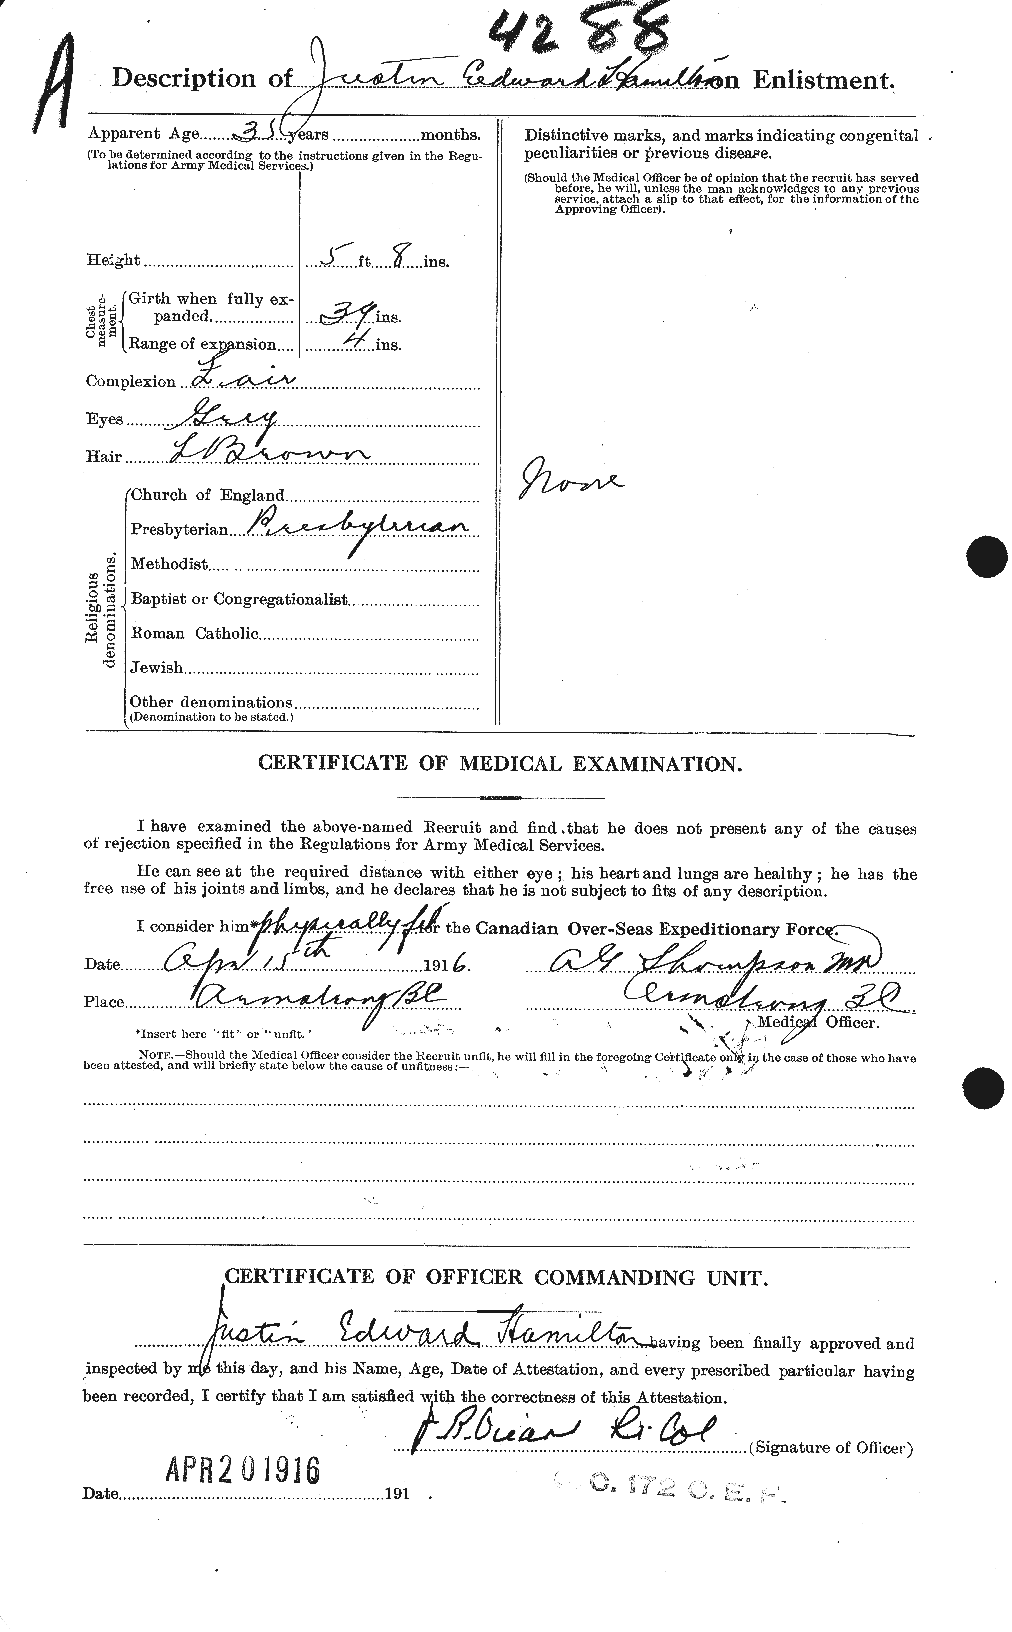 Personnel Records of the First World War - CEF 373149b